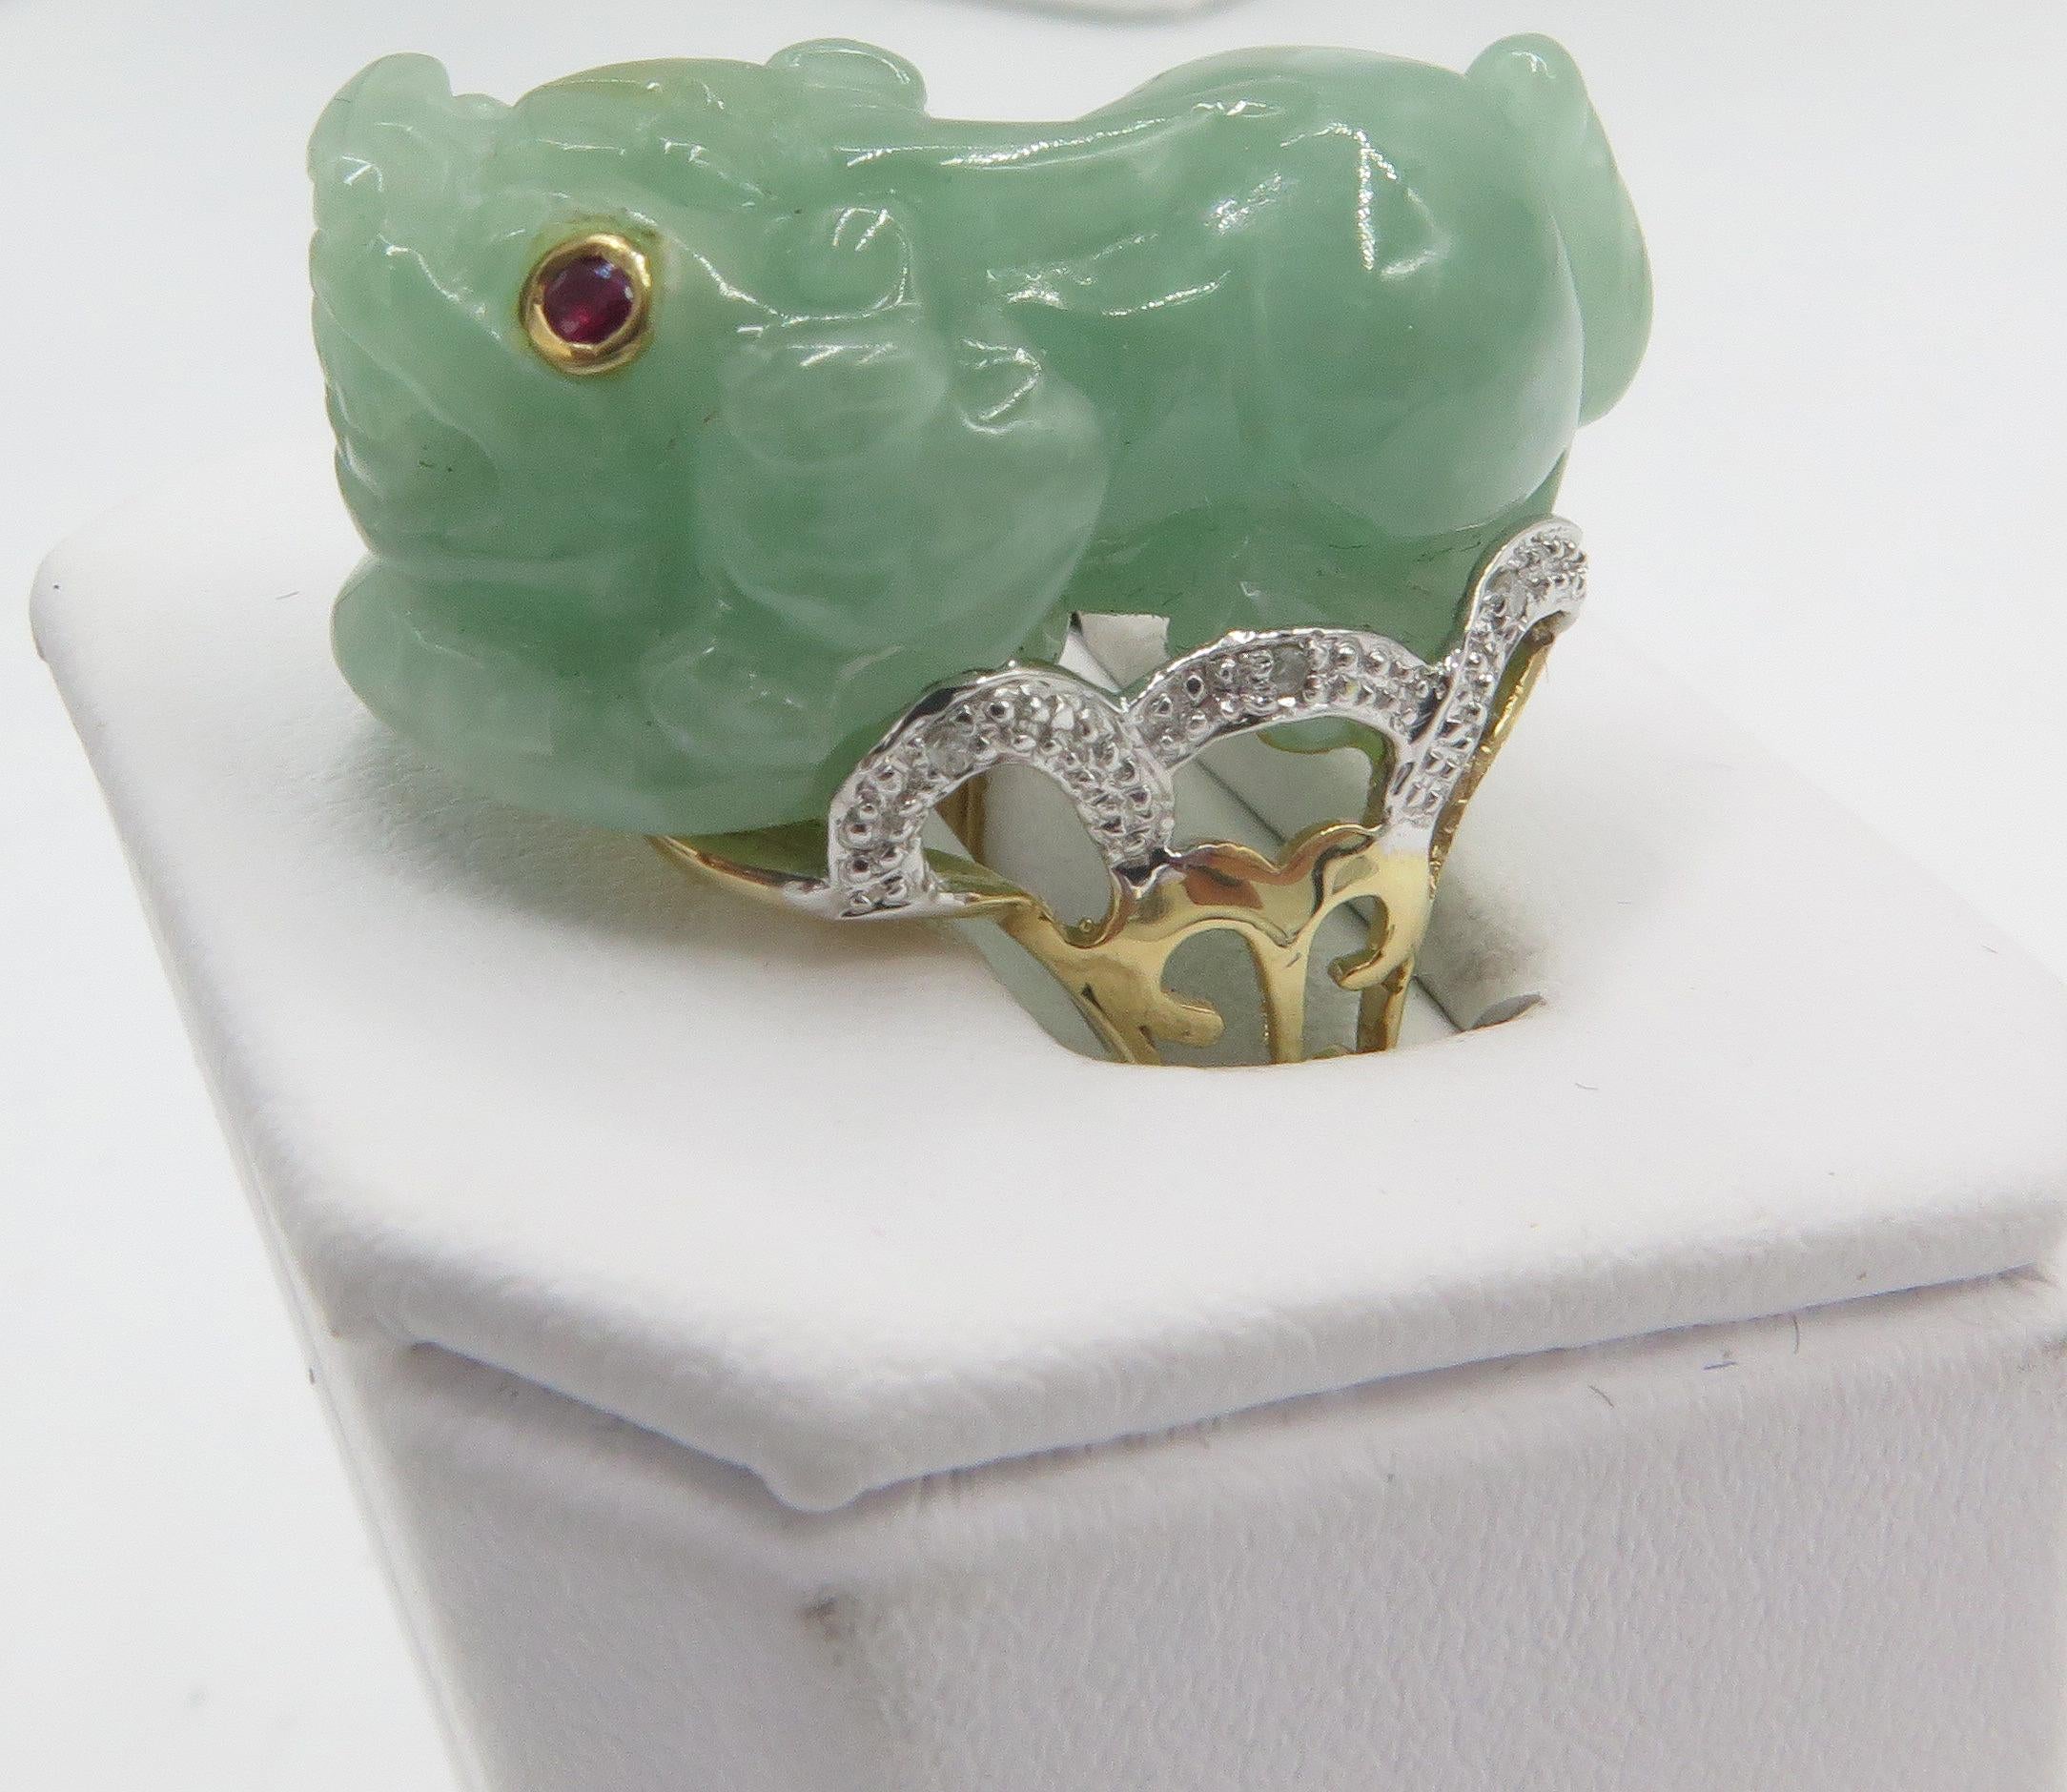 Beautifully carved jade foo dog with ruby eyes & diamond accented filigree shank. The, ring weighs 12.82 grams and it is a us ring size 7 1/2. The ring feature a beautiful mounting in 18k white gold with diamonds on the sides. The, beautifully